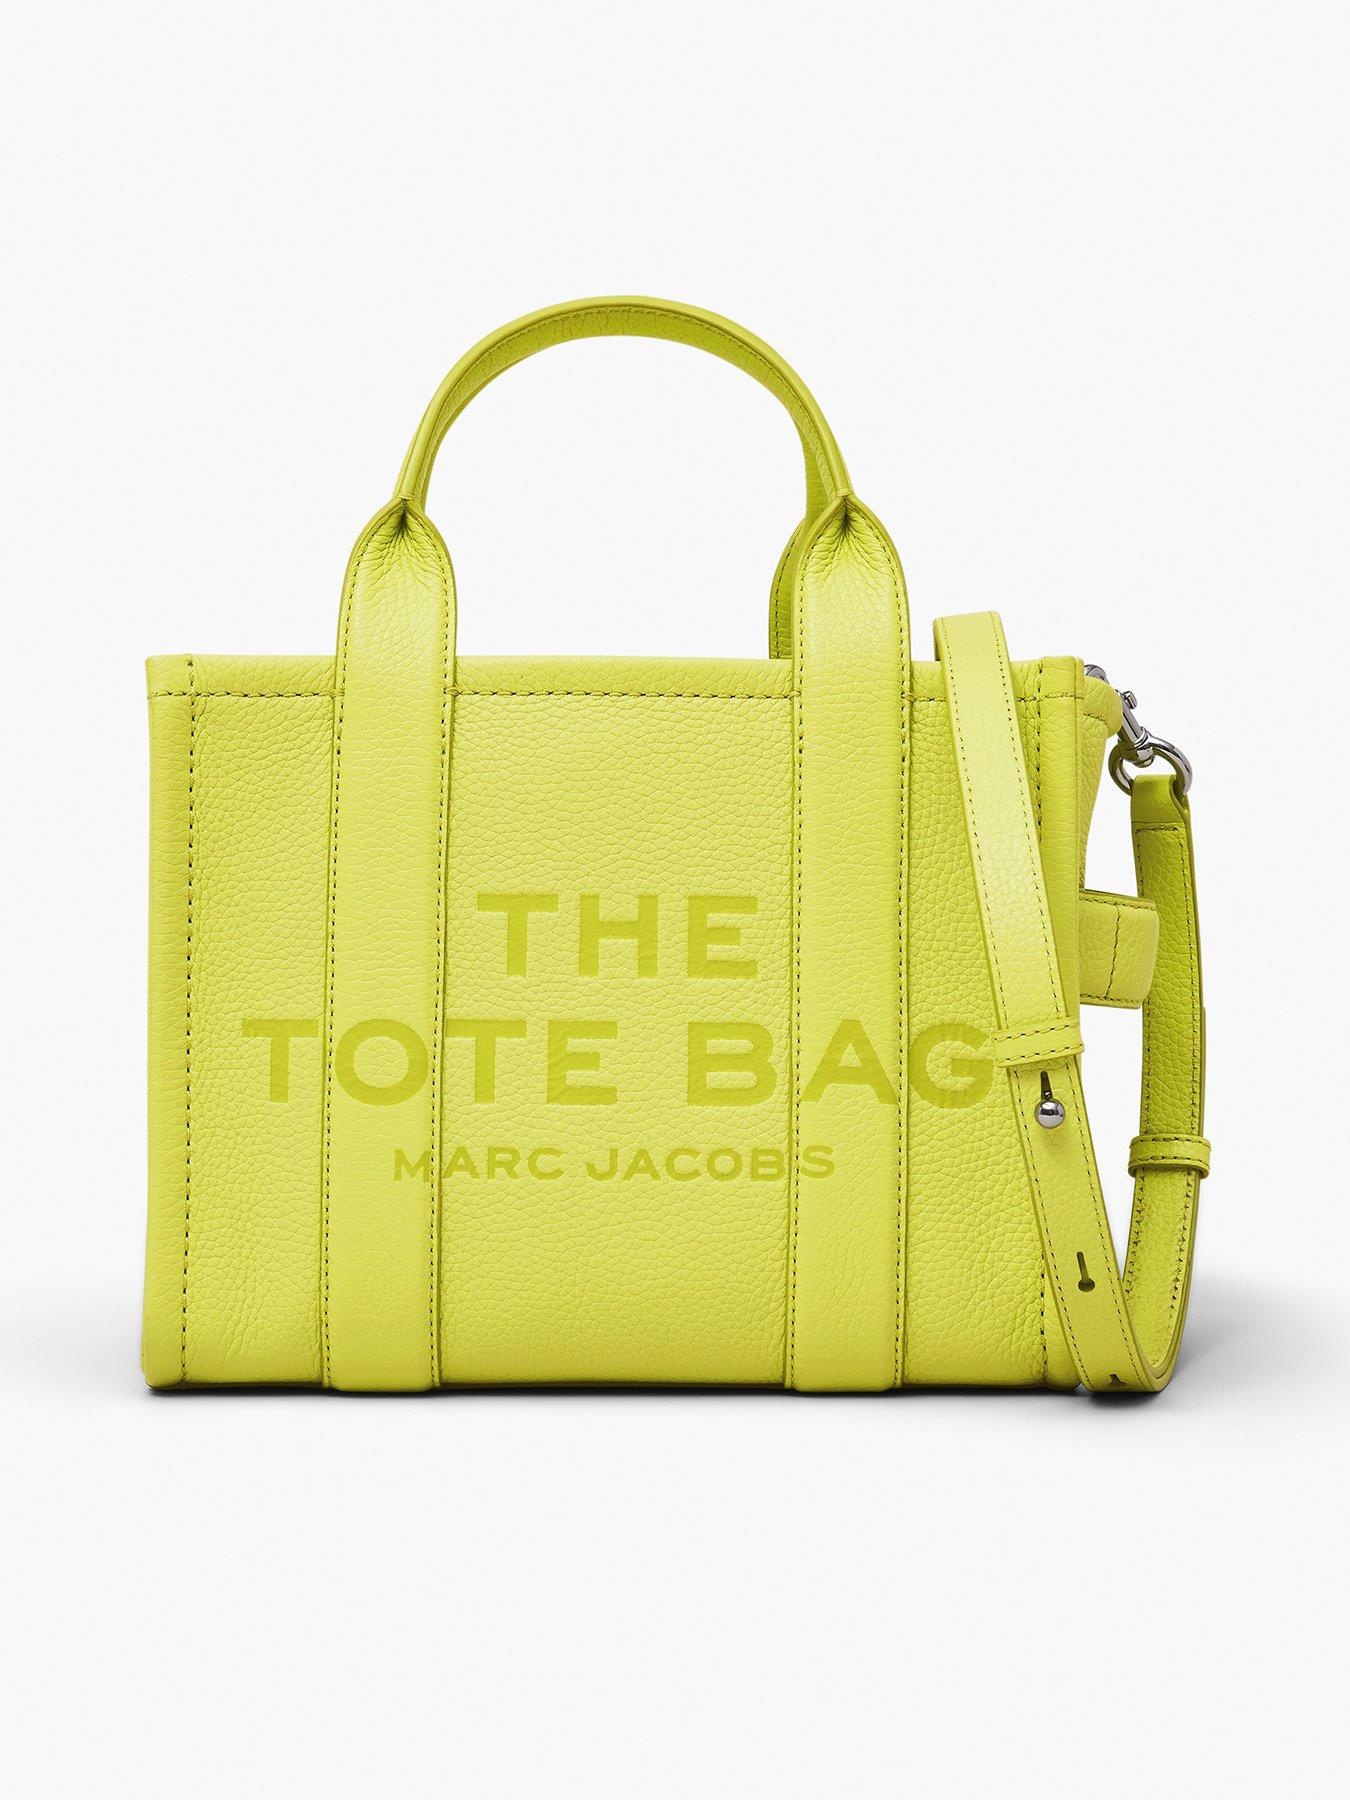 MARC JACOBS The Small Tote Bag - Limoncello | very.co.uk